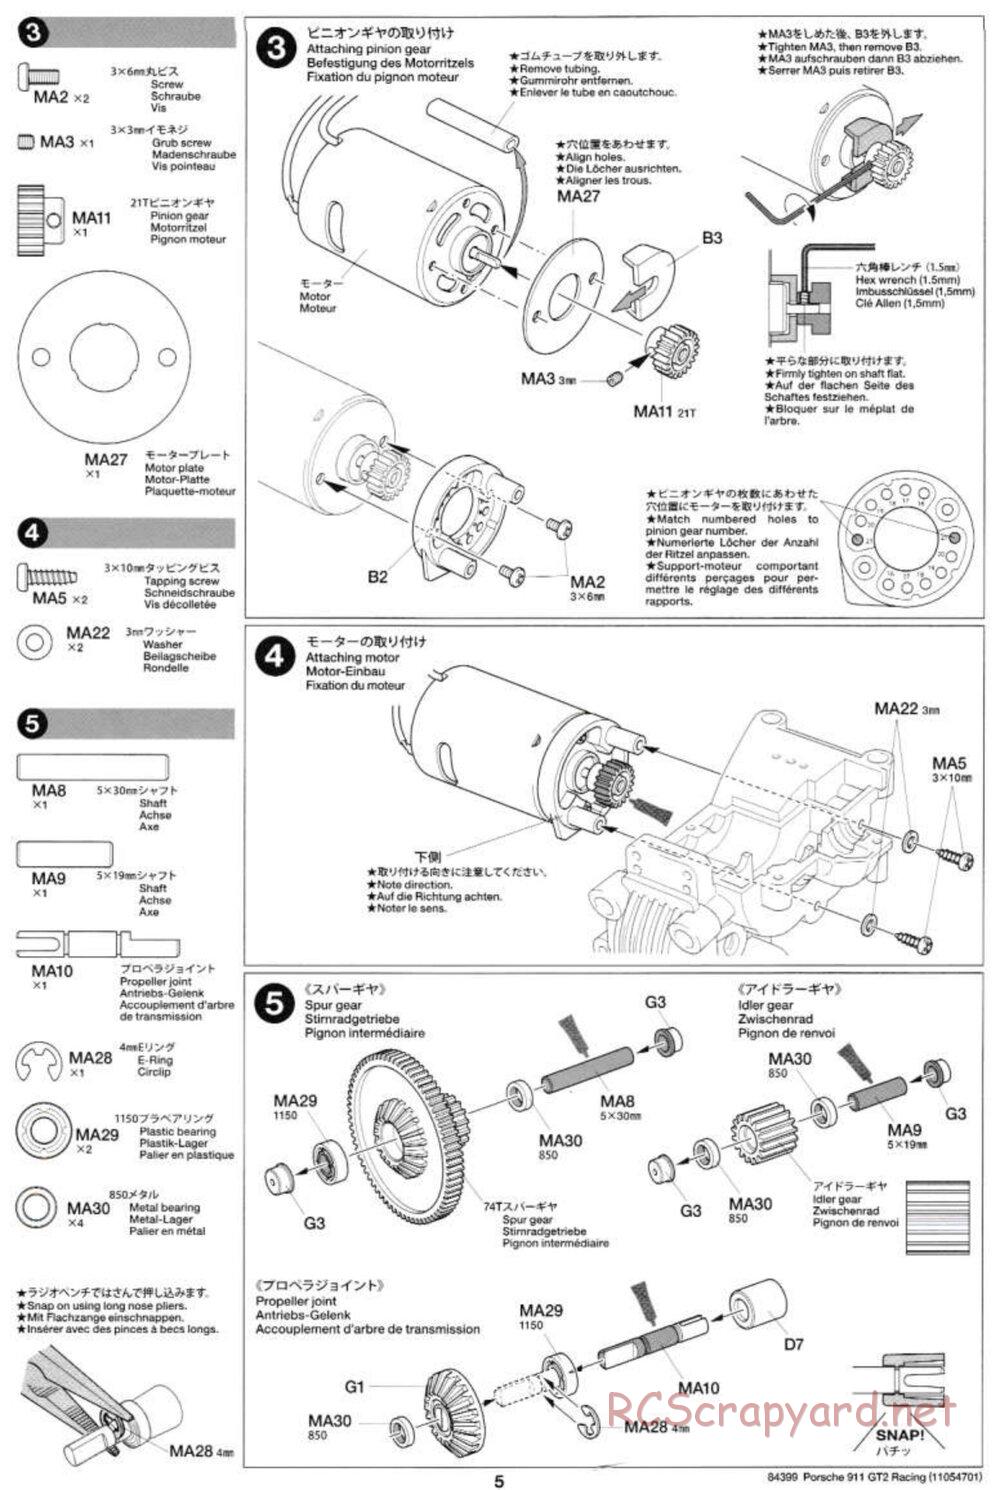 Tamiya - Porsche 911 GT2 Racing - TA-02SW Chassis - Manual - Page 5